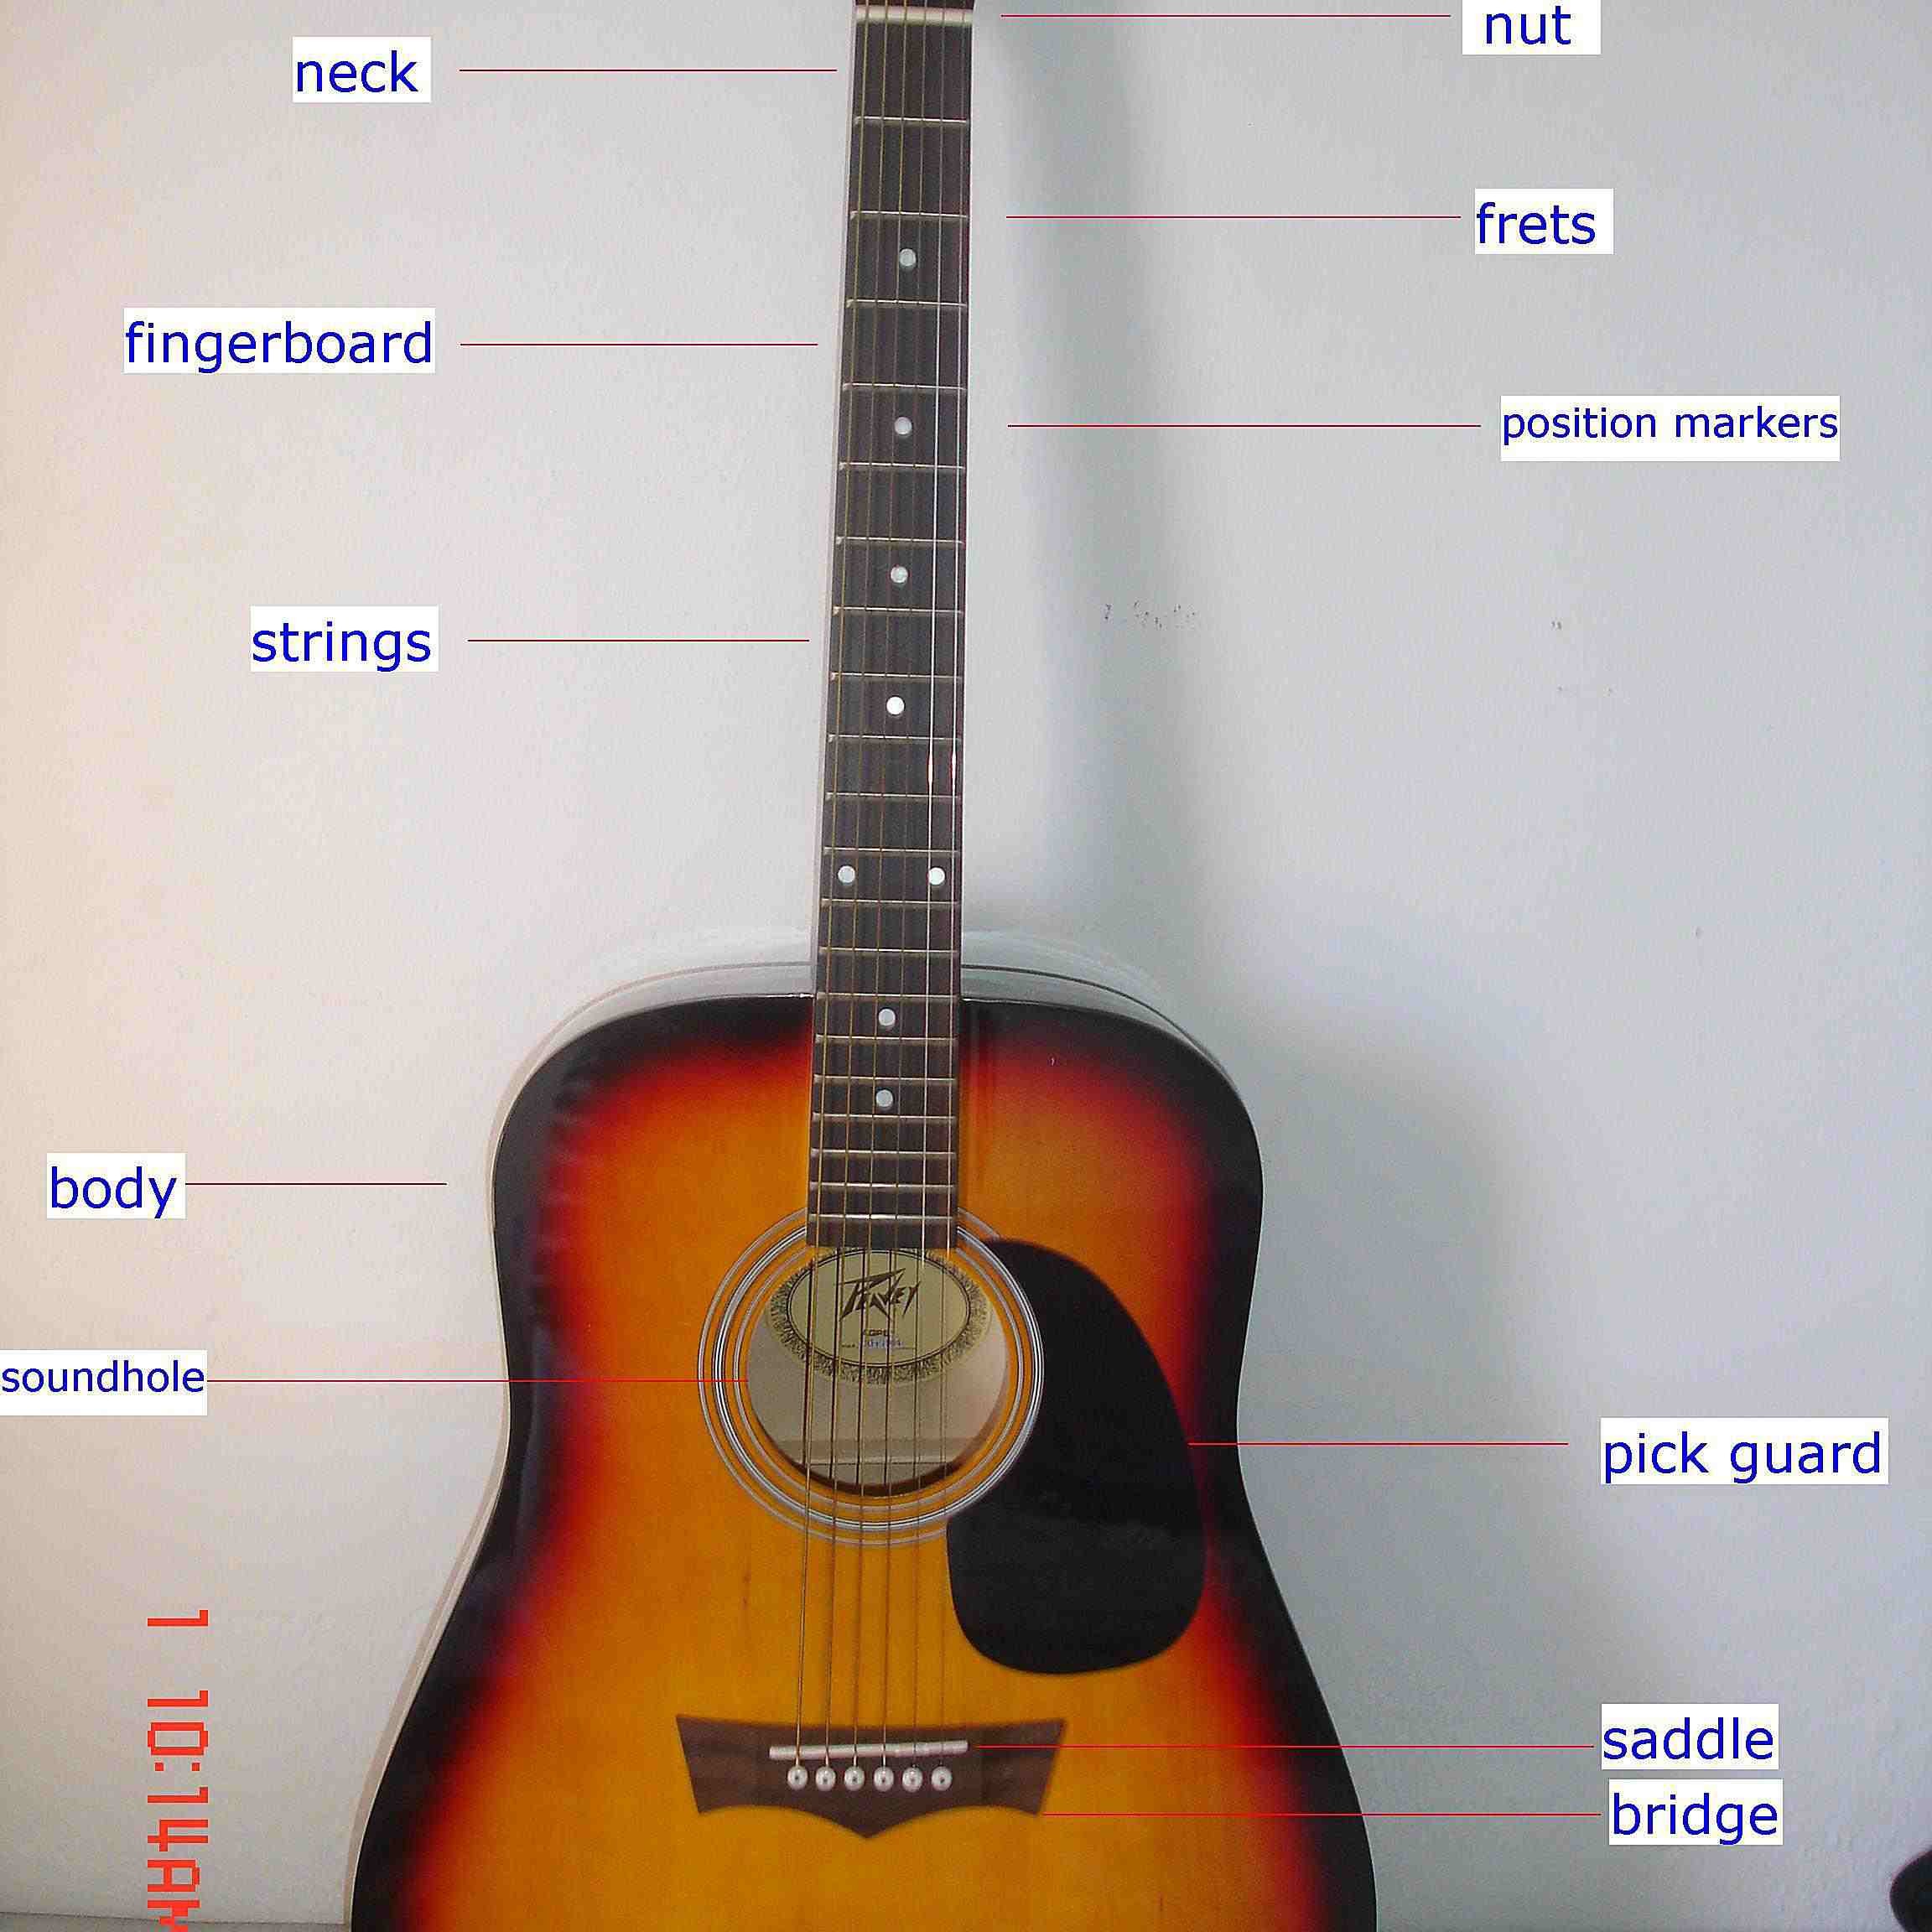 Parts of the Guitar